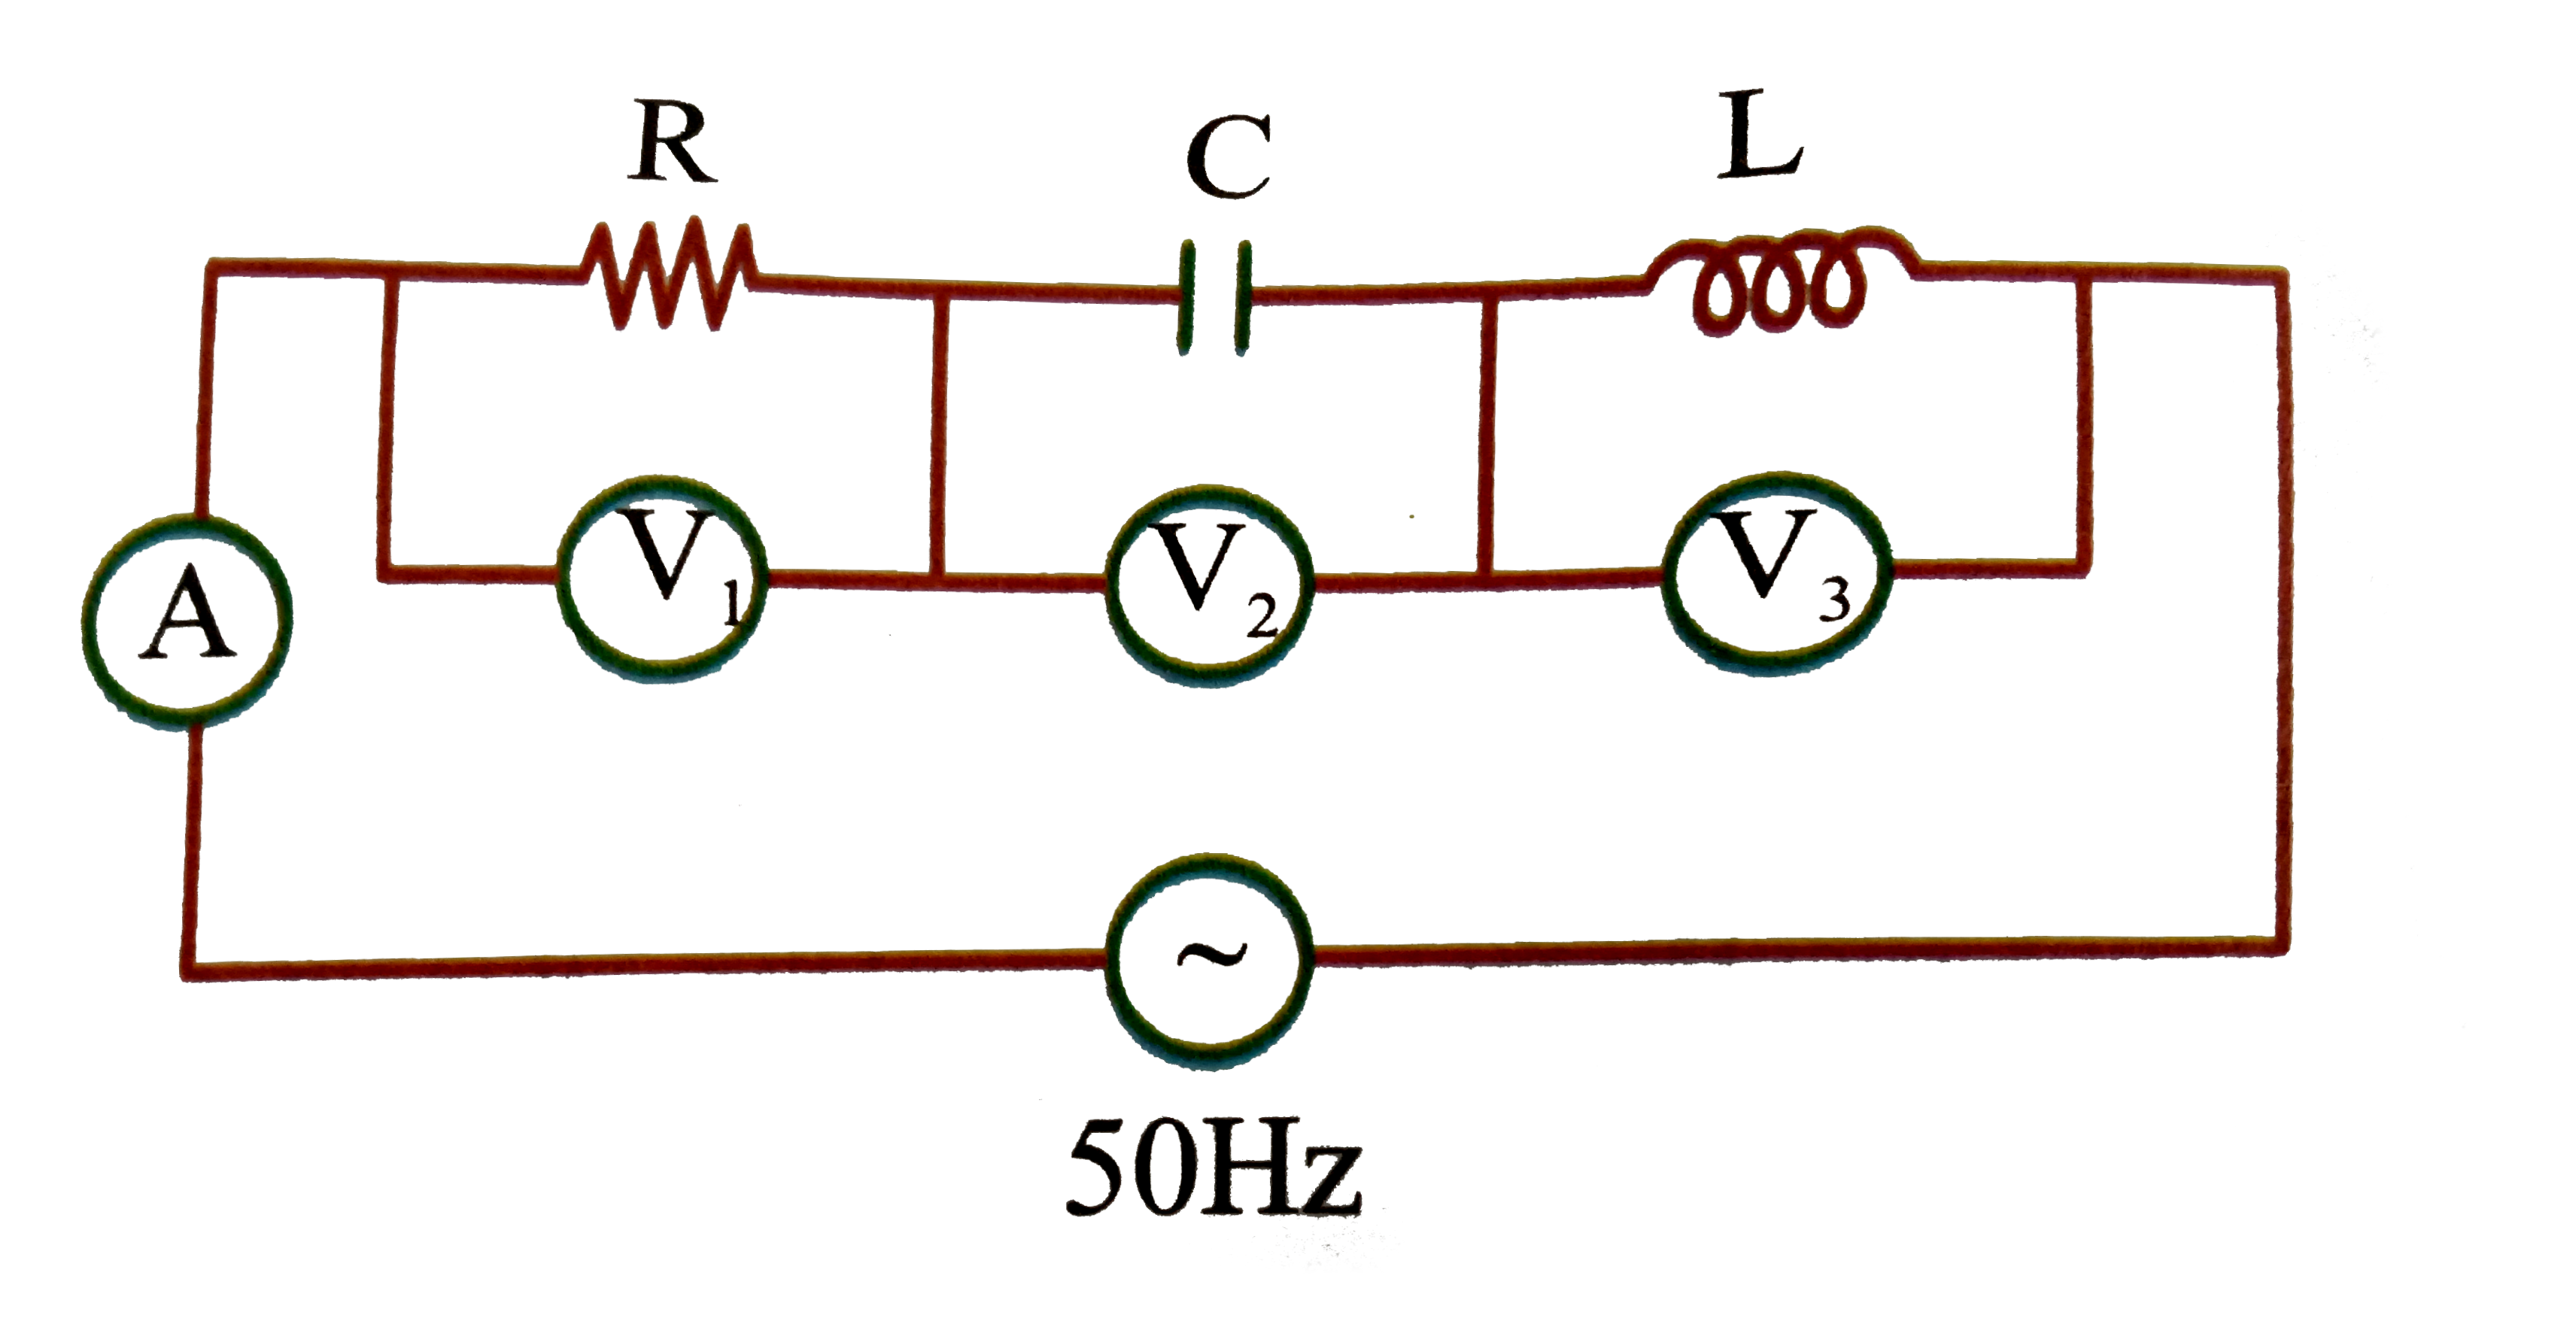 In the figure shown V(1),V(2),V(3) are AC voltmeters and A is AC ammeter. The readings of V(1), V(2), V(3) and 10 V, 20 V, 20 V, 2A respectively. If the inductor is short circuited, then